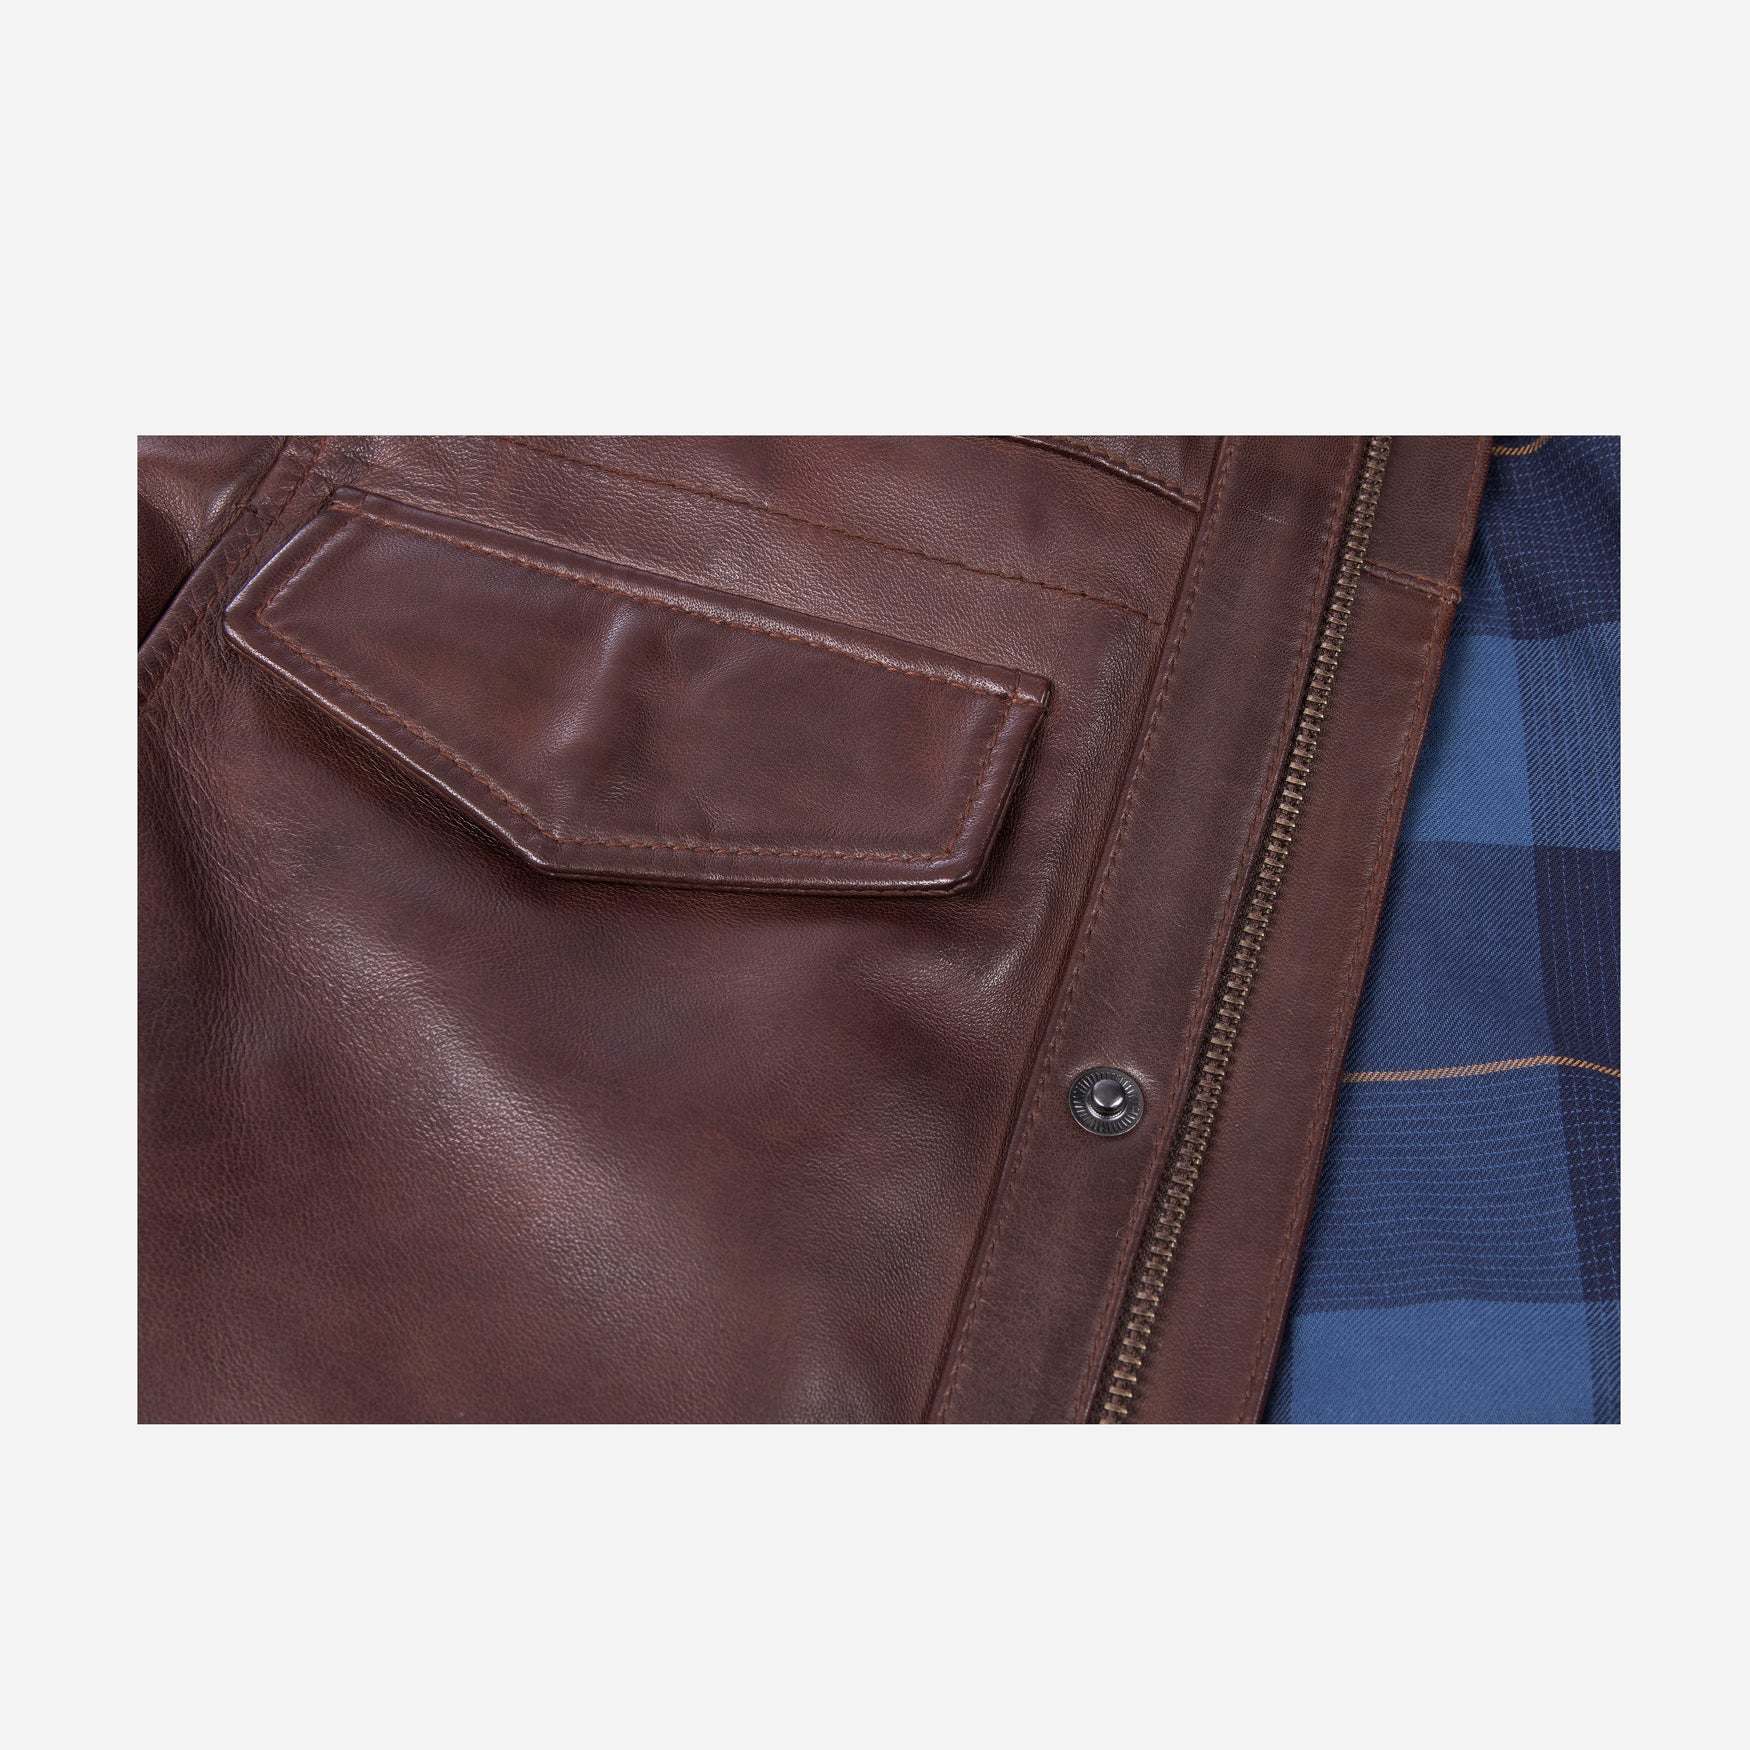 Marlon Jacket, Brown - Leather Jacket | Brando Leather South Africa